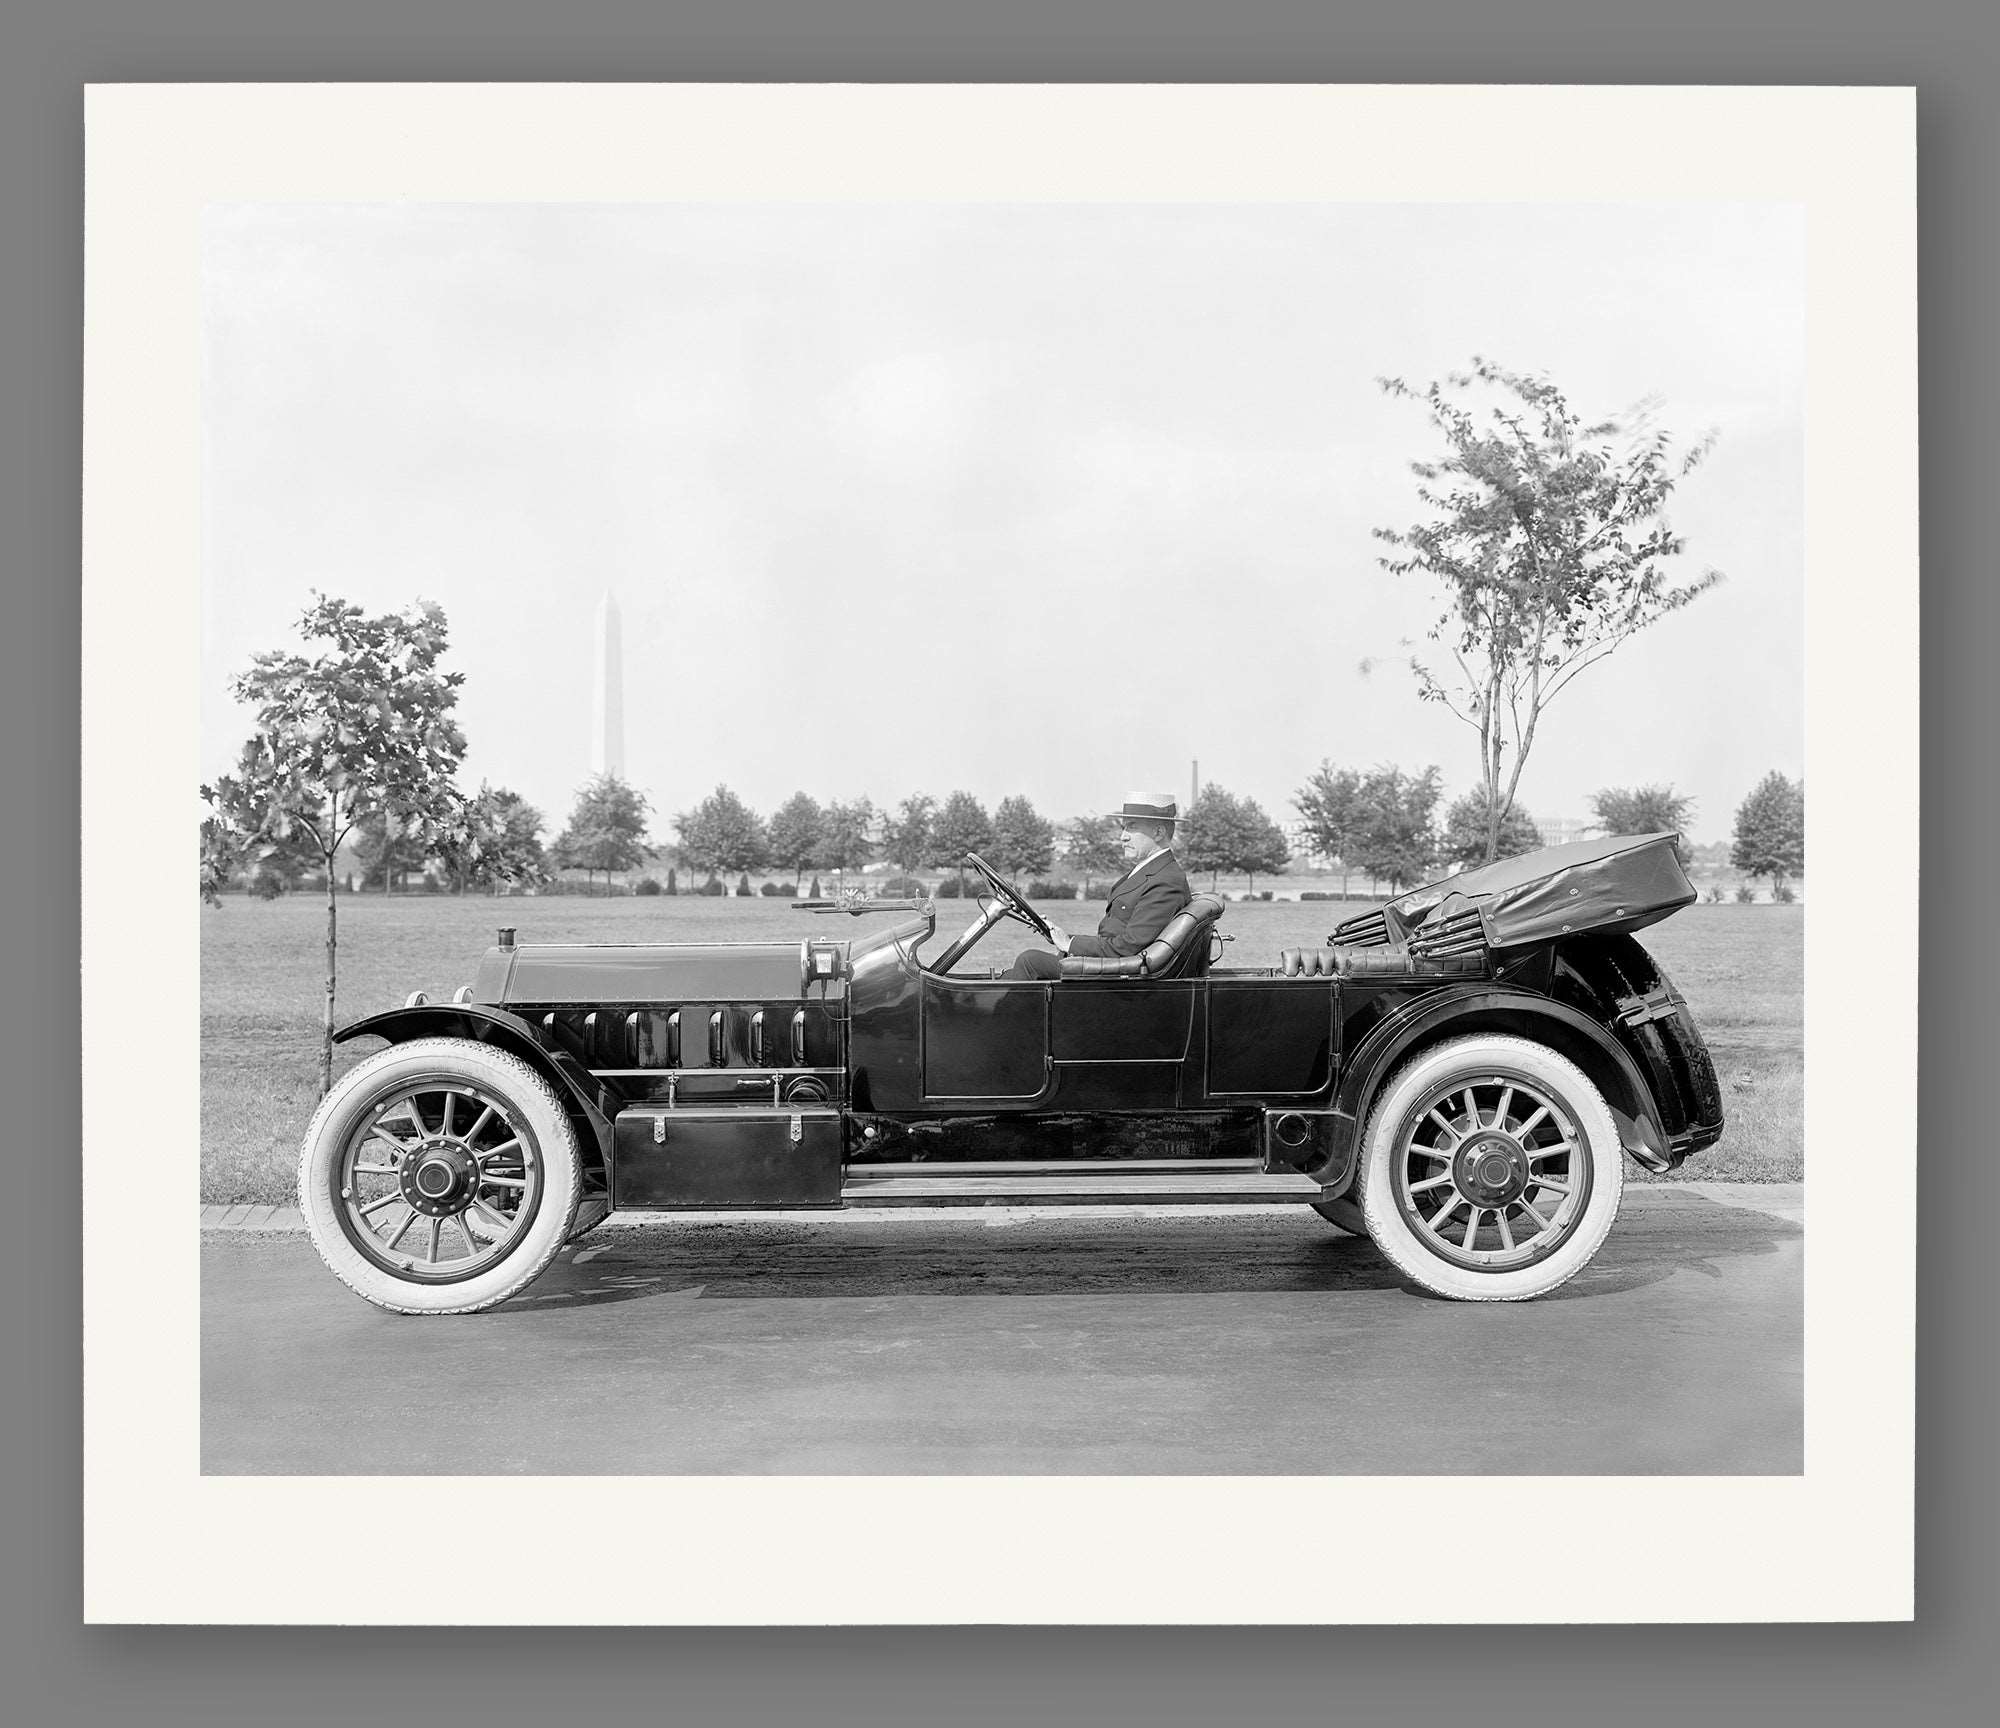 A paper print of a vintage photograph of a man in a vehicle by Marmon Motor Car Company